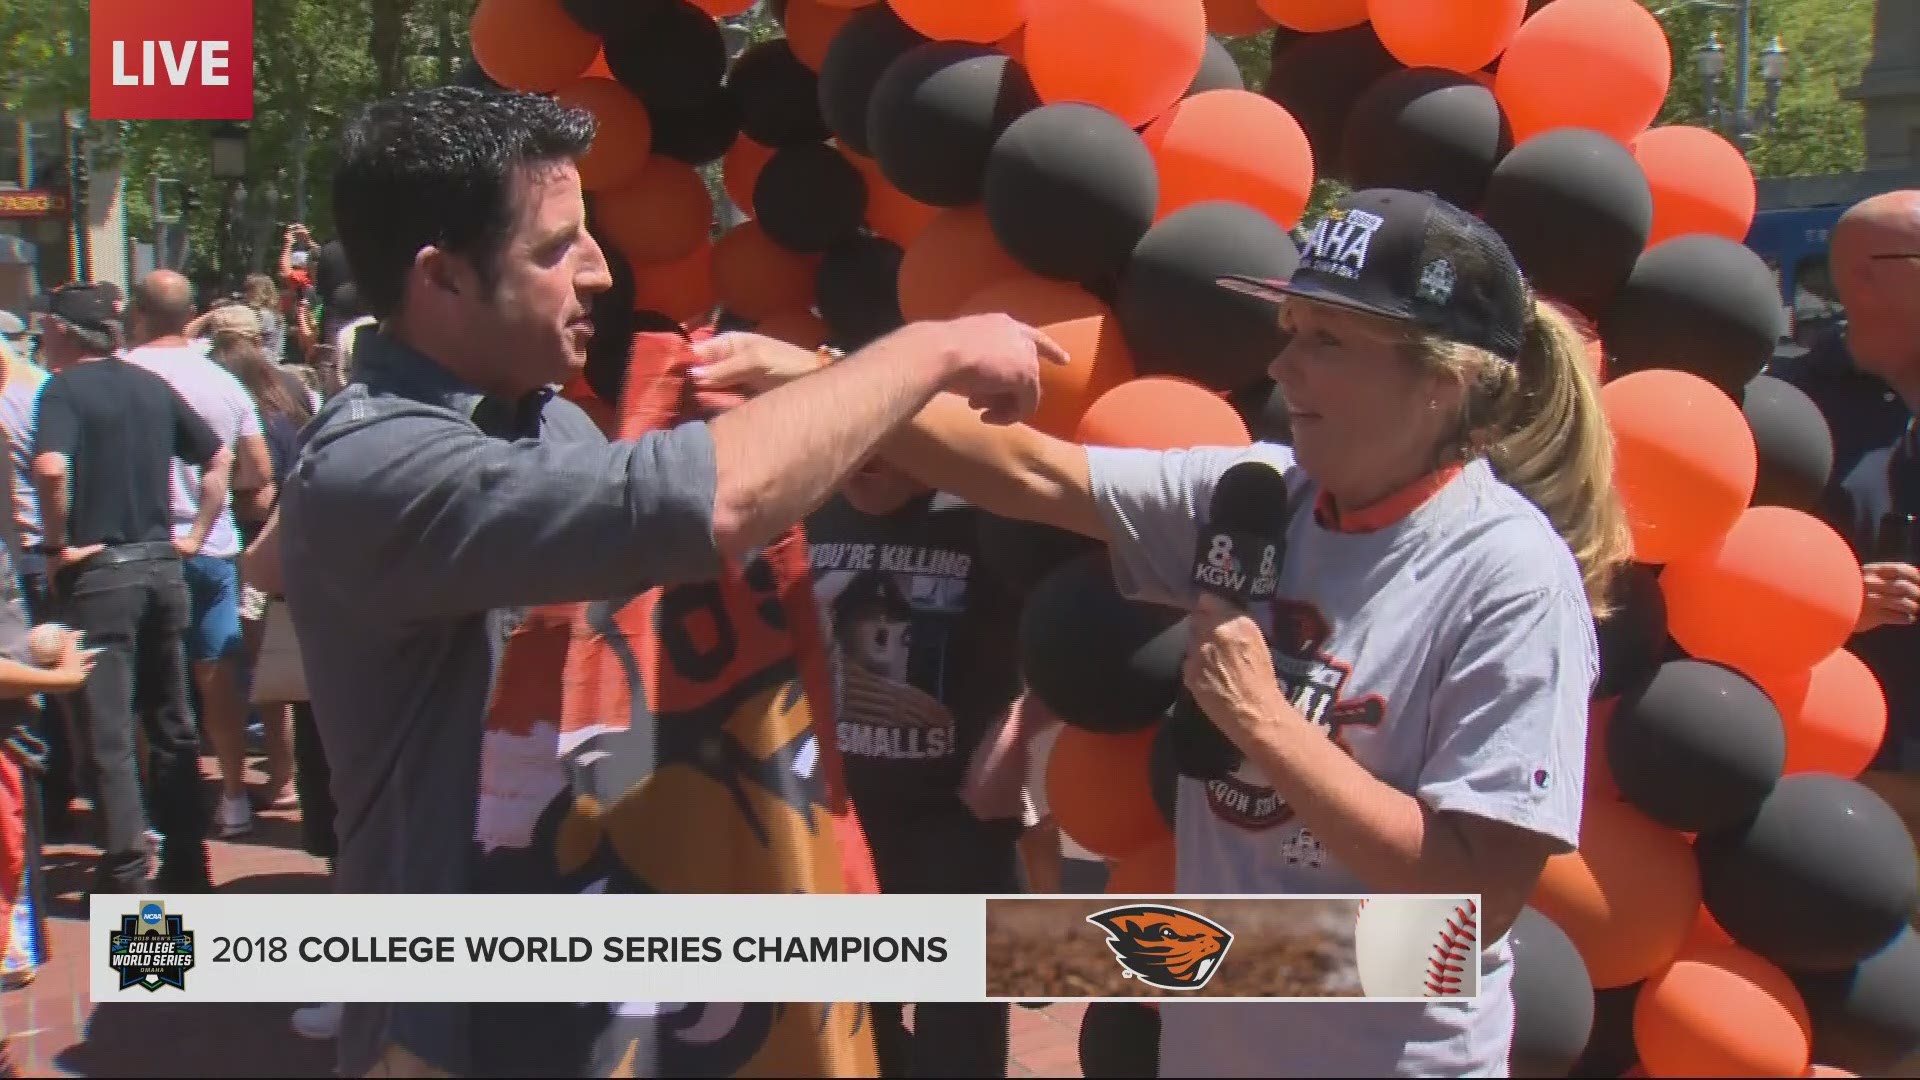 The Oregon State Beavers celebrated their College World Series Championship win with a rally at Portland's Pioneer Courthouse Square. Here's the whole rally, in case you missed it.Here's a look at how the series played out: https://on.kgw.com/osu18